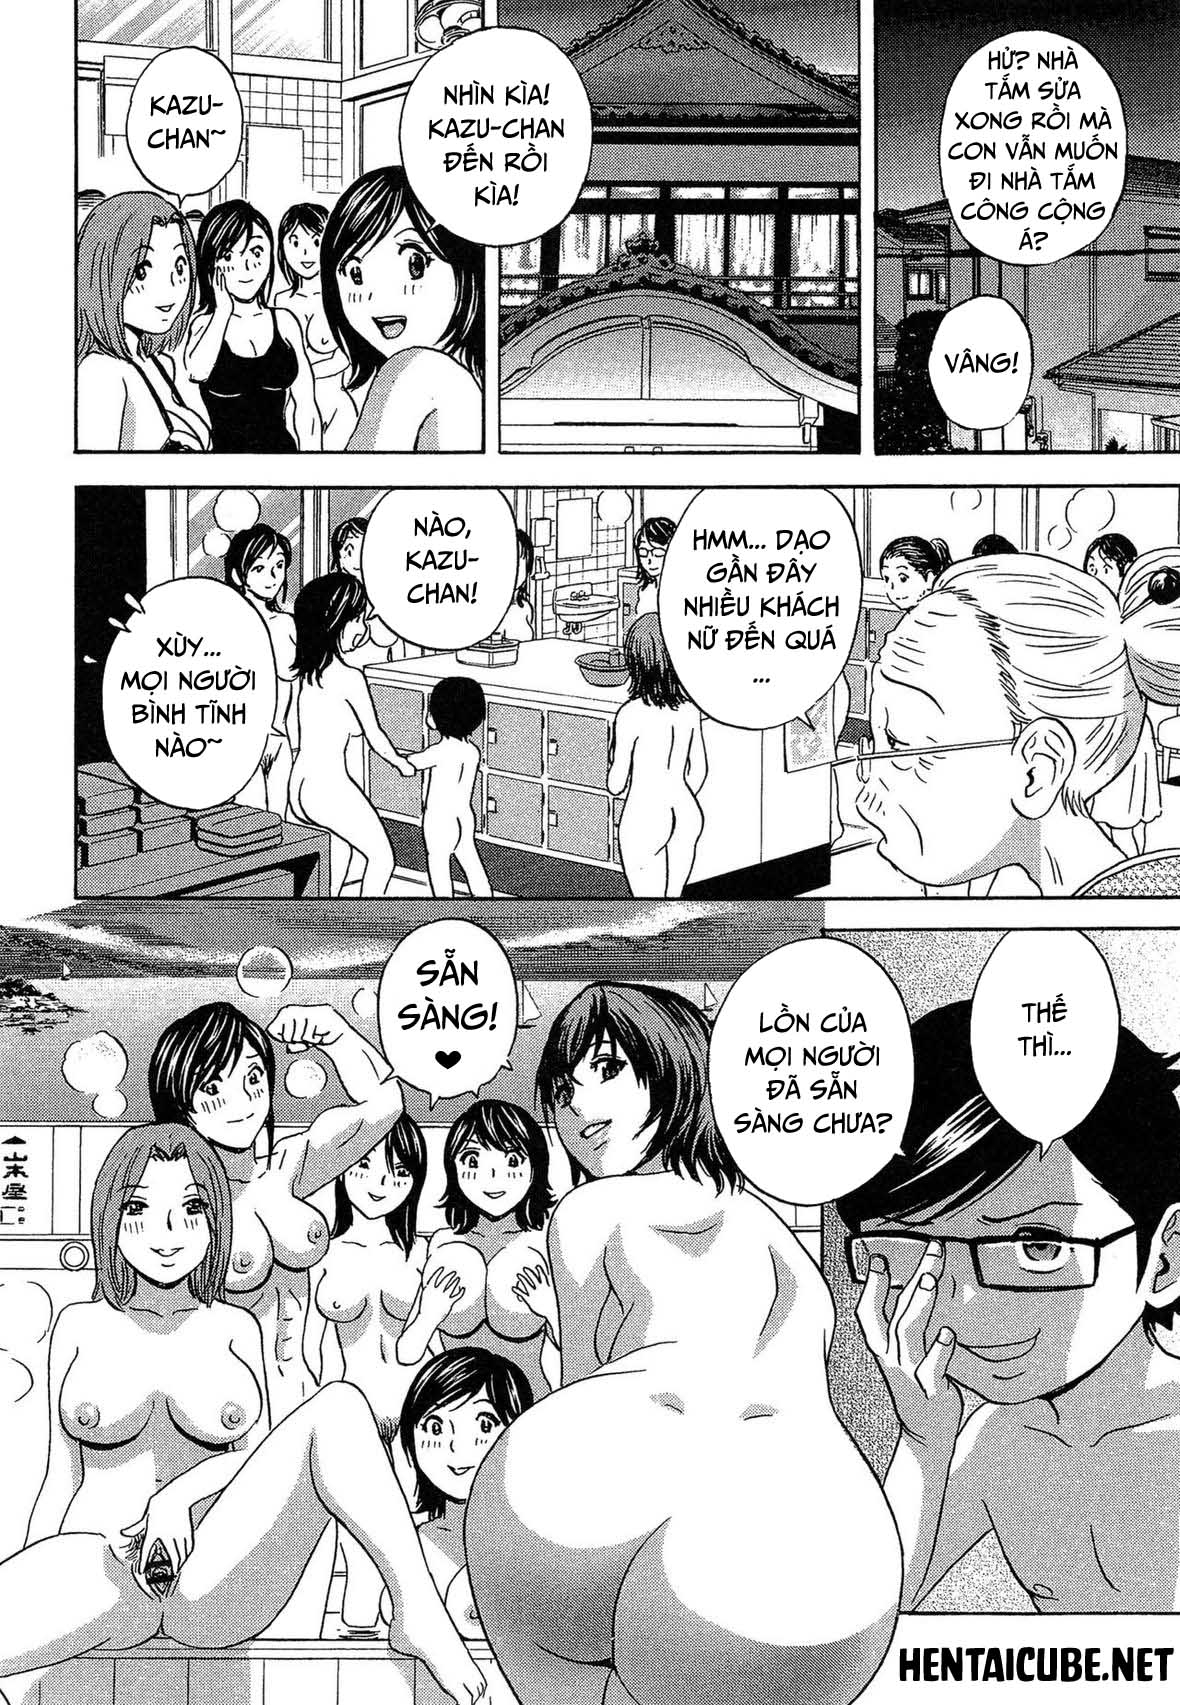 Xem ảnh Become A Kid And Have Sex All The Time - Chapter 5 - 1602826431828_0 - Hentai24h.Tv